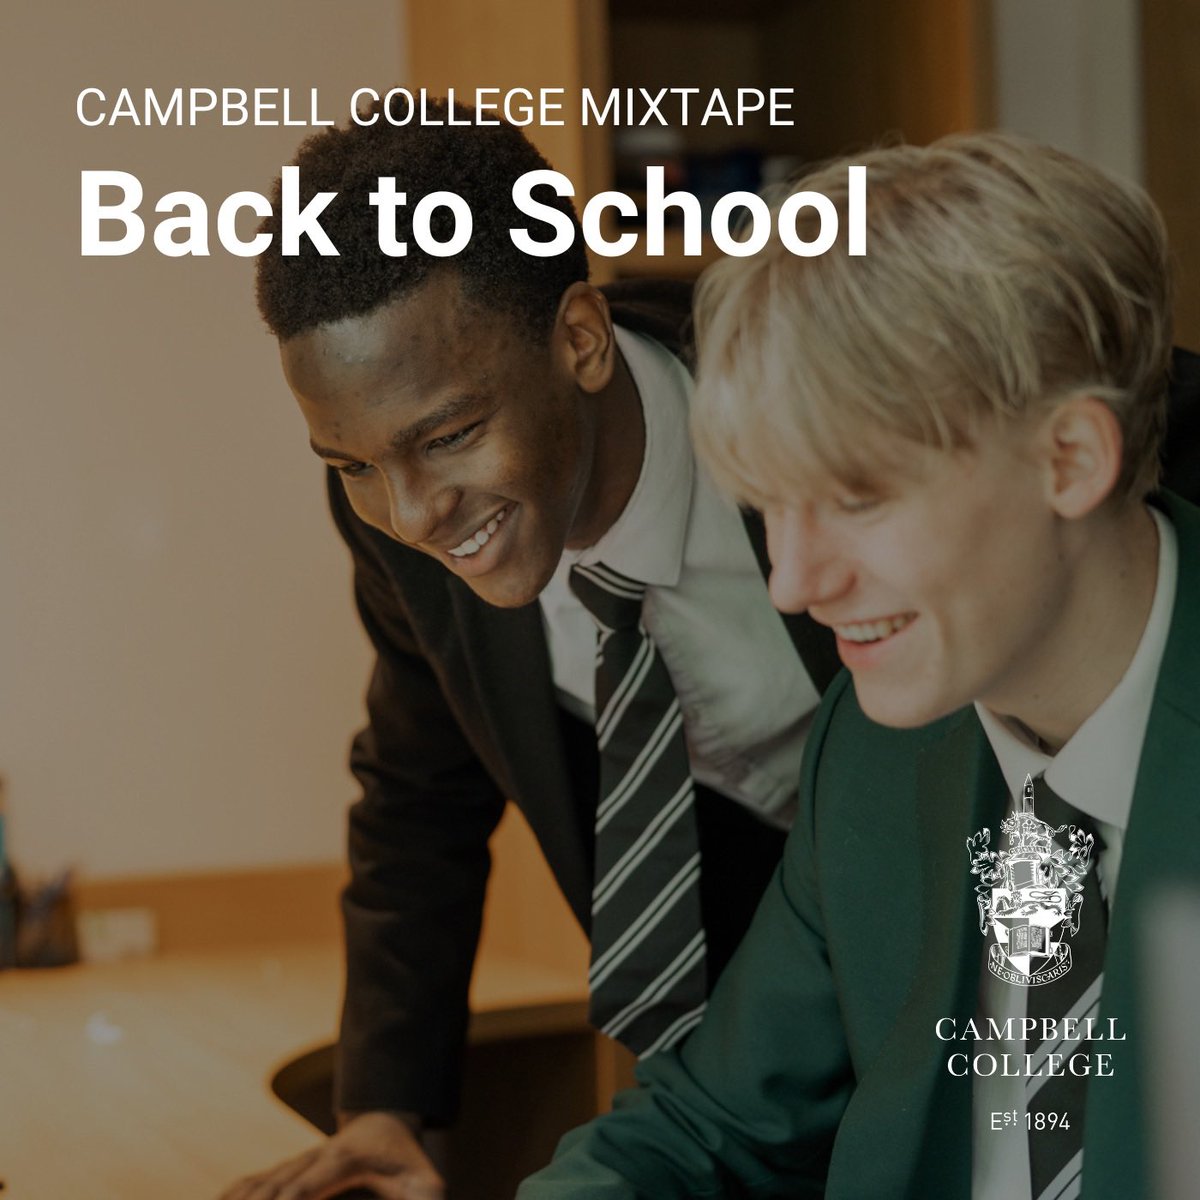 Heading back for your final year of school? Driving to the College for the first time? Just reminiscing about the good old days… no matter how long ago they were? Click the link below to find 50 songs that will help you through it all! spoti.fi/3Tsn6za